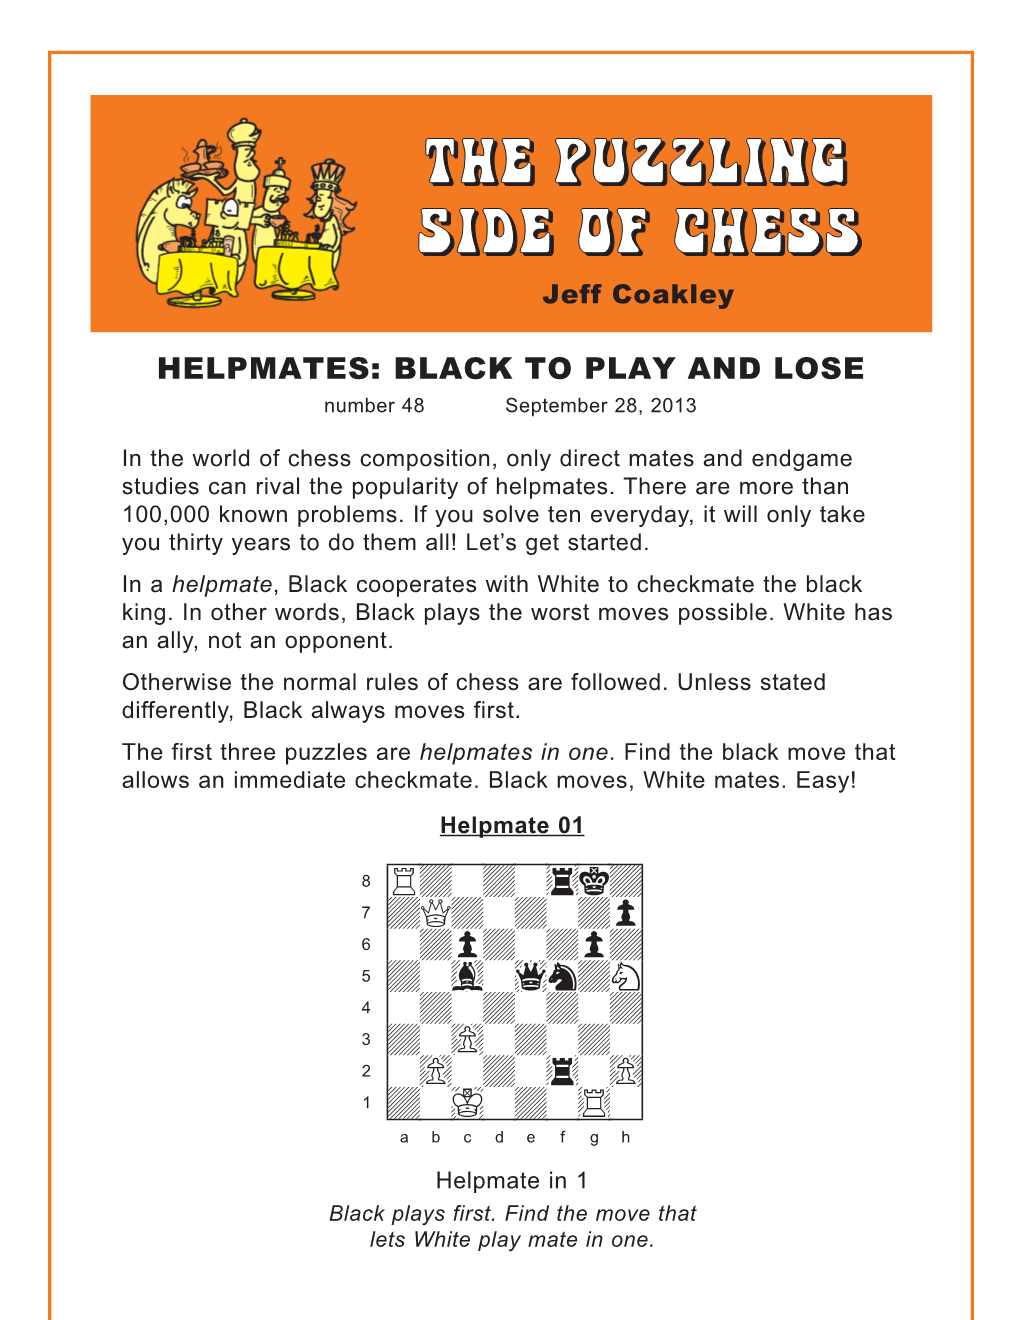 48 Helpmates: Black to Play and Lose